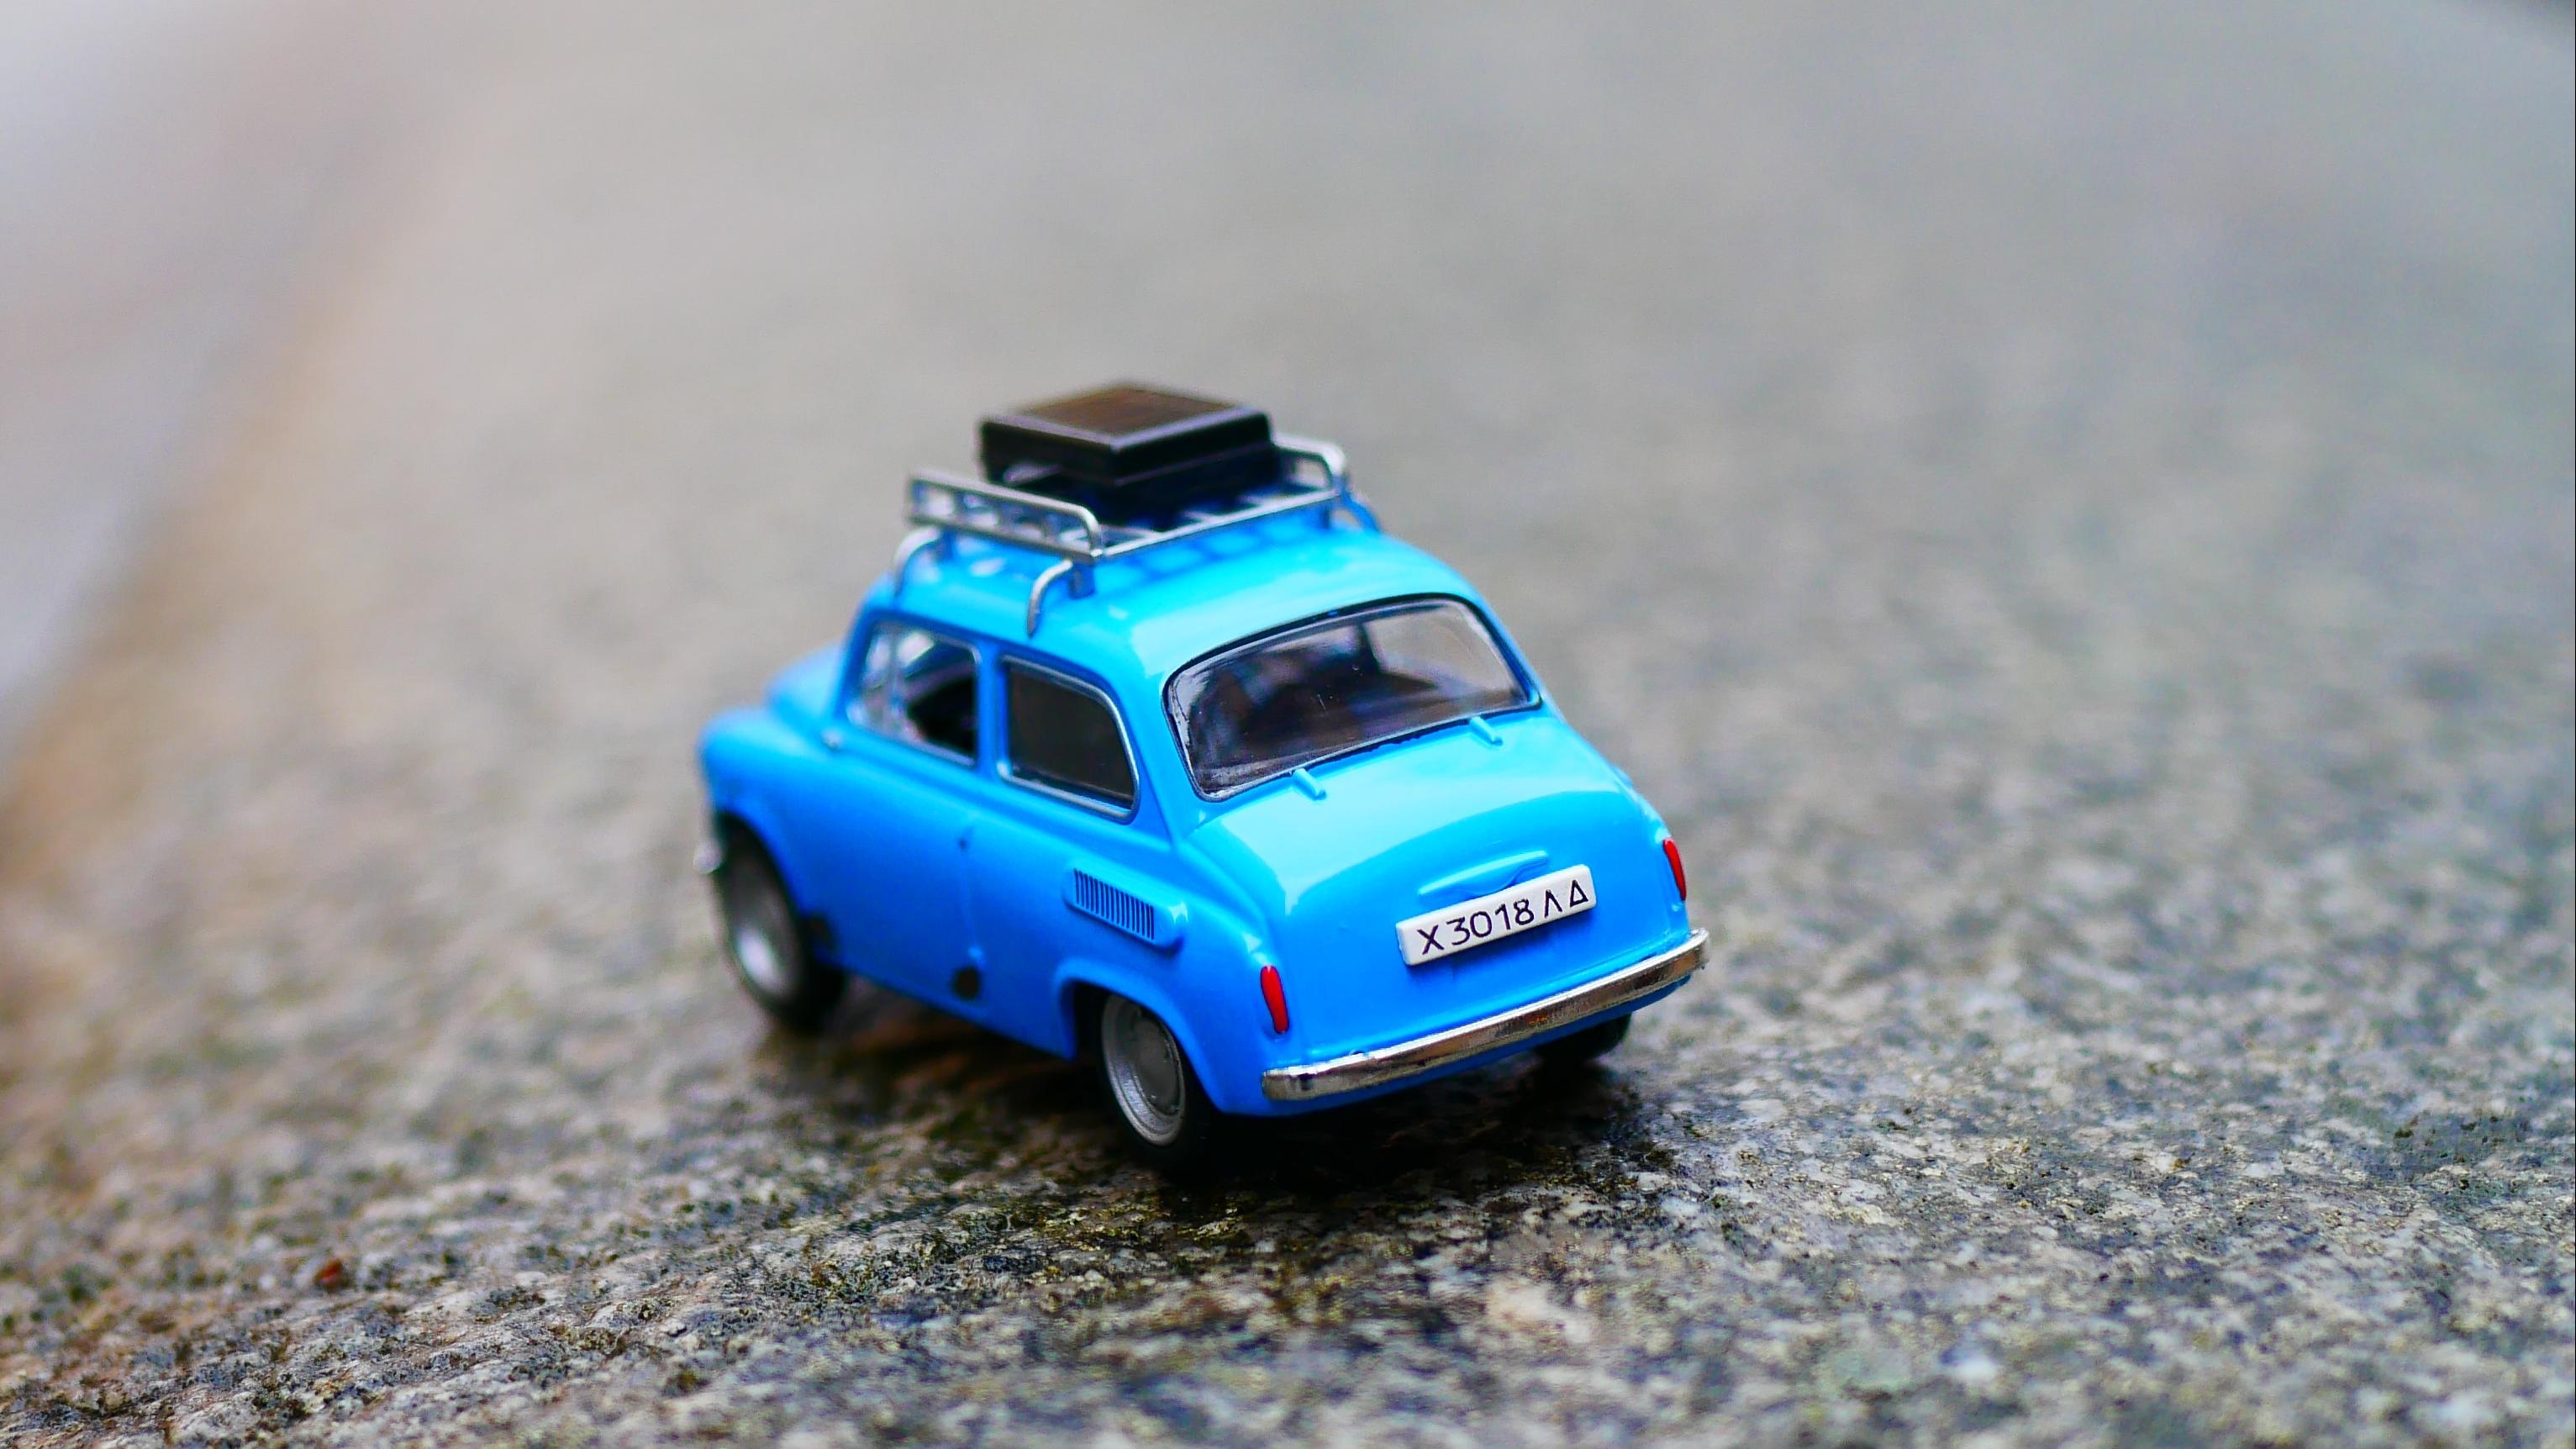 Blue toy car on road with blurred background